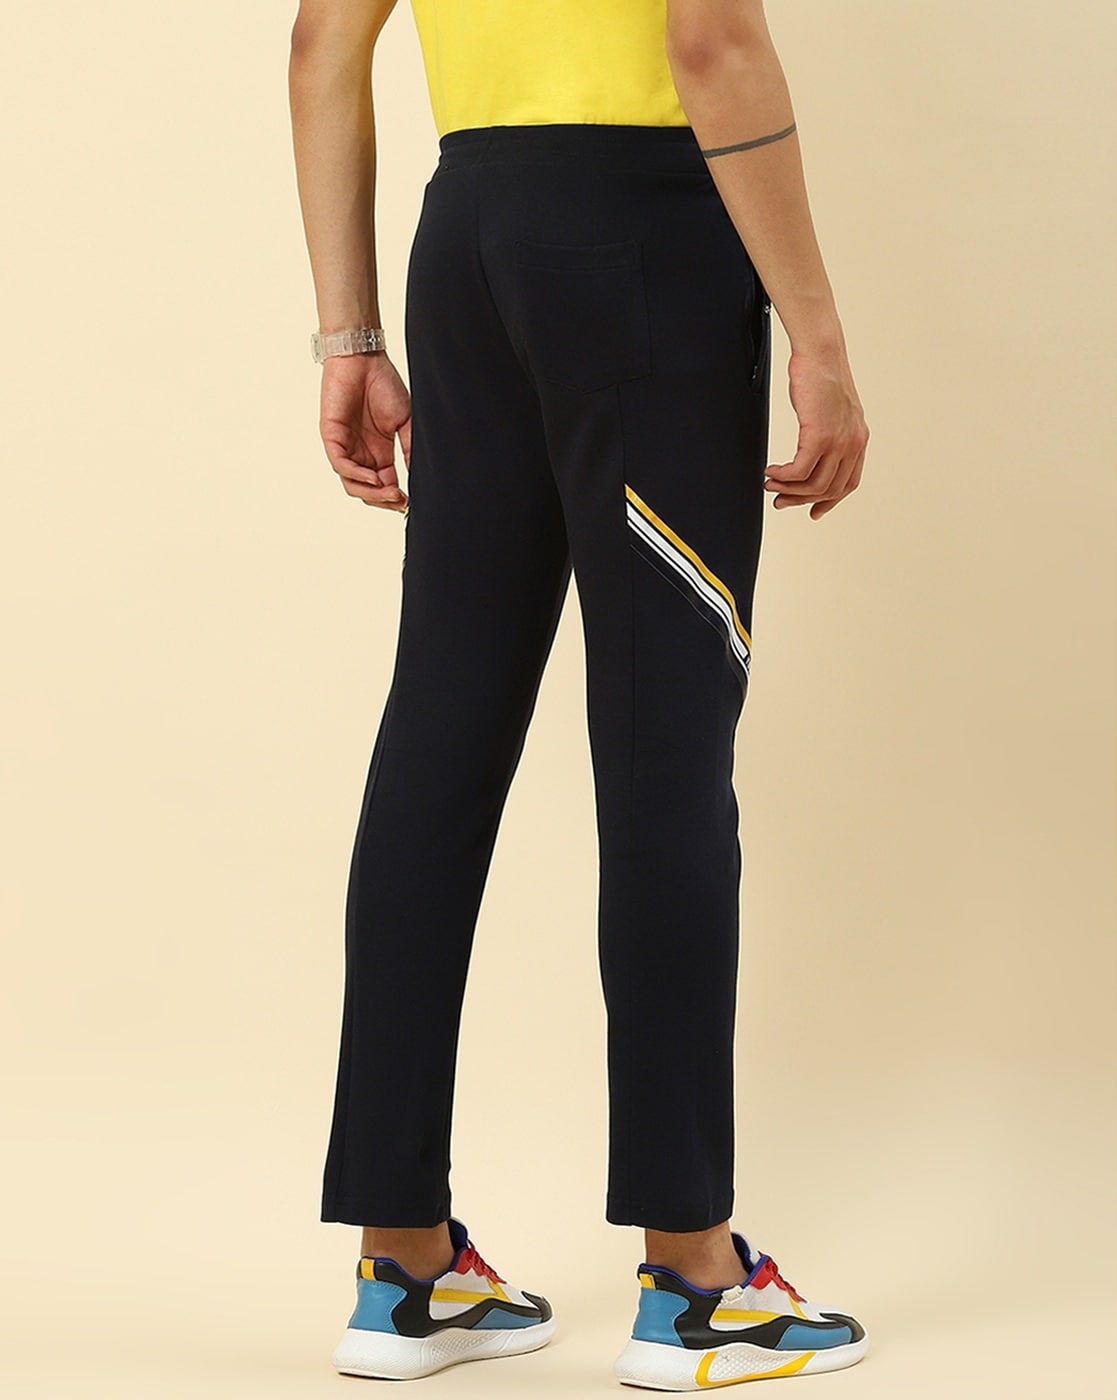 Buy Black Track Pants for Men by Red chief Online | Ajio.com